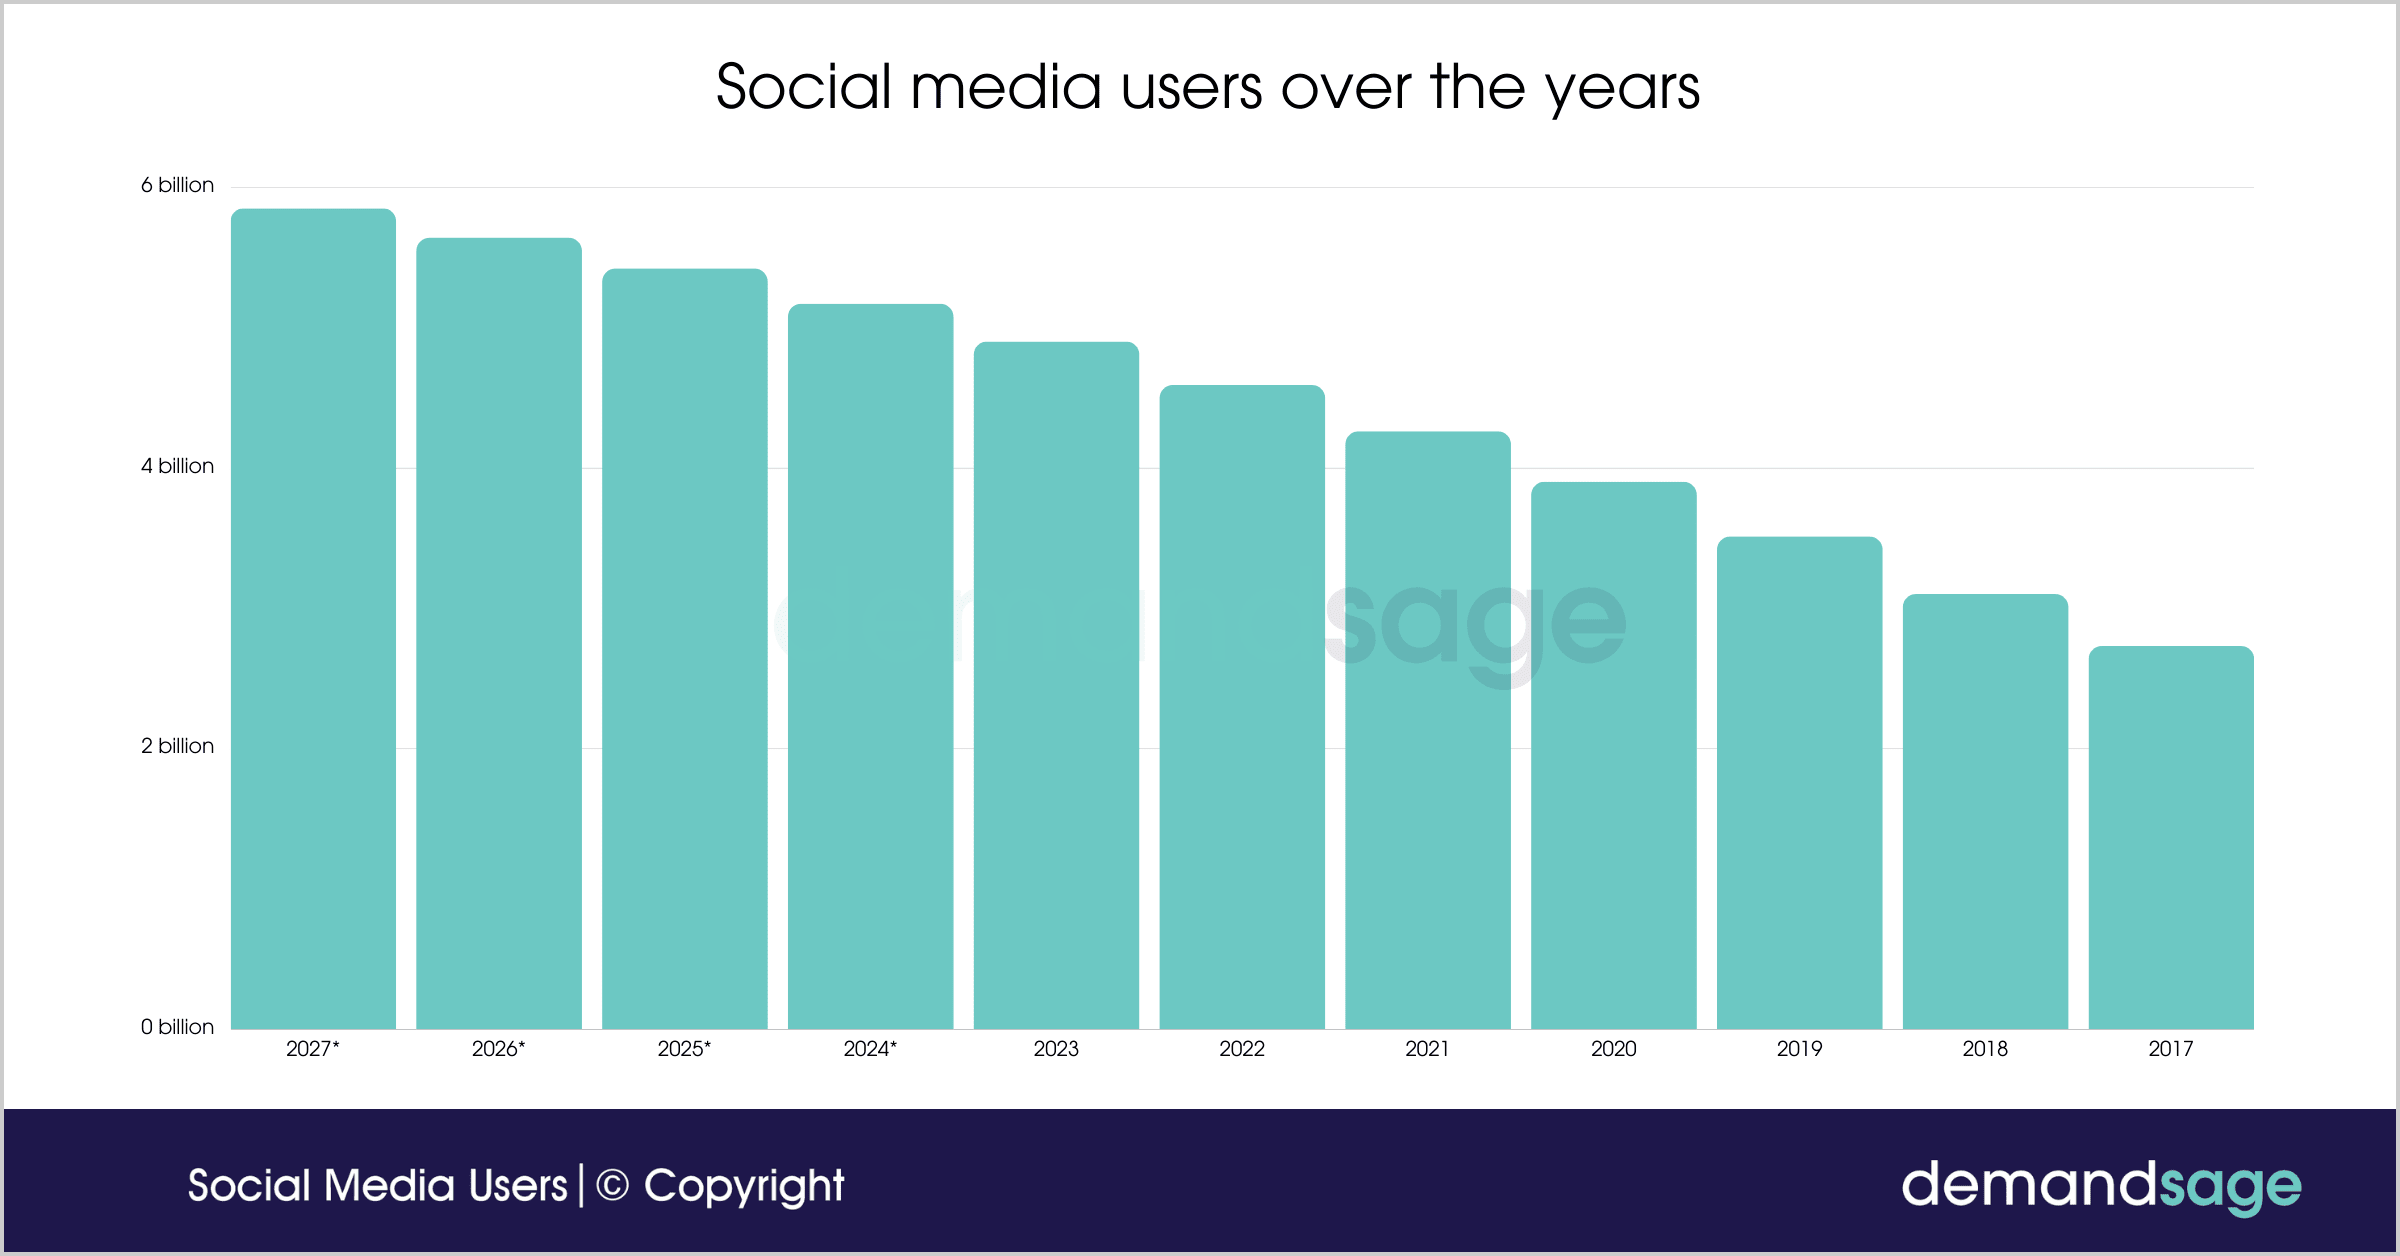 A bar chart showing the steady increase in social media usage from 2017 to 2027